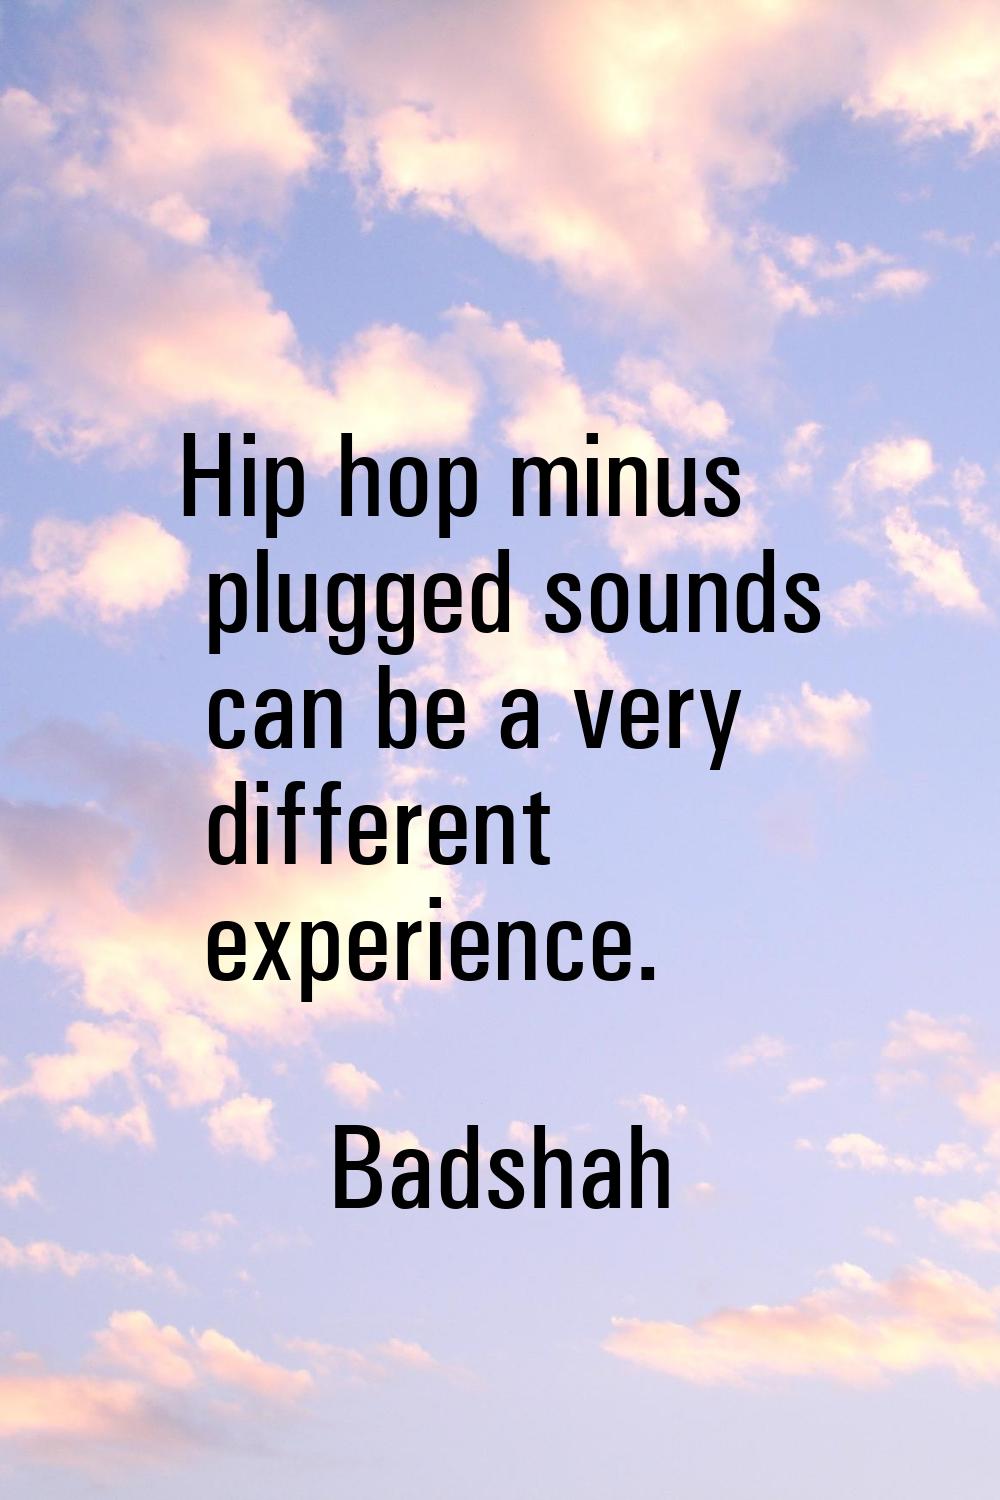 Hip hop minus plugged sounds can be a very different experience.